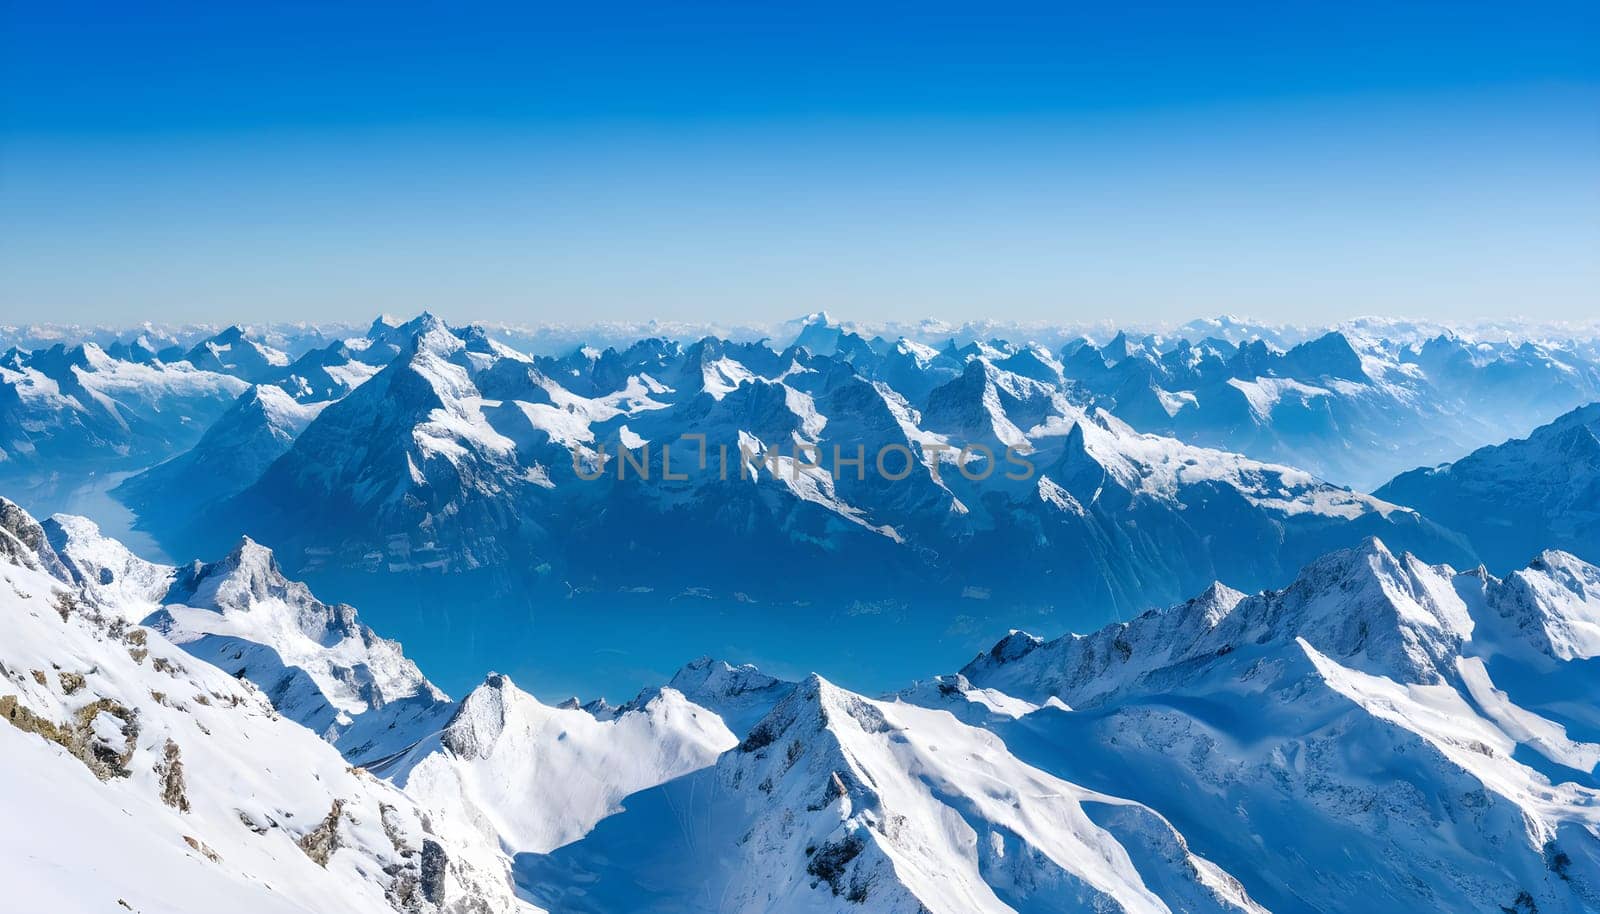 Snowy Panorama: Spectacular Views of the Alps by Petrichor